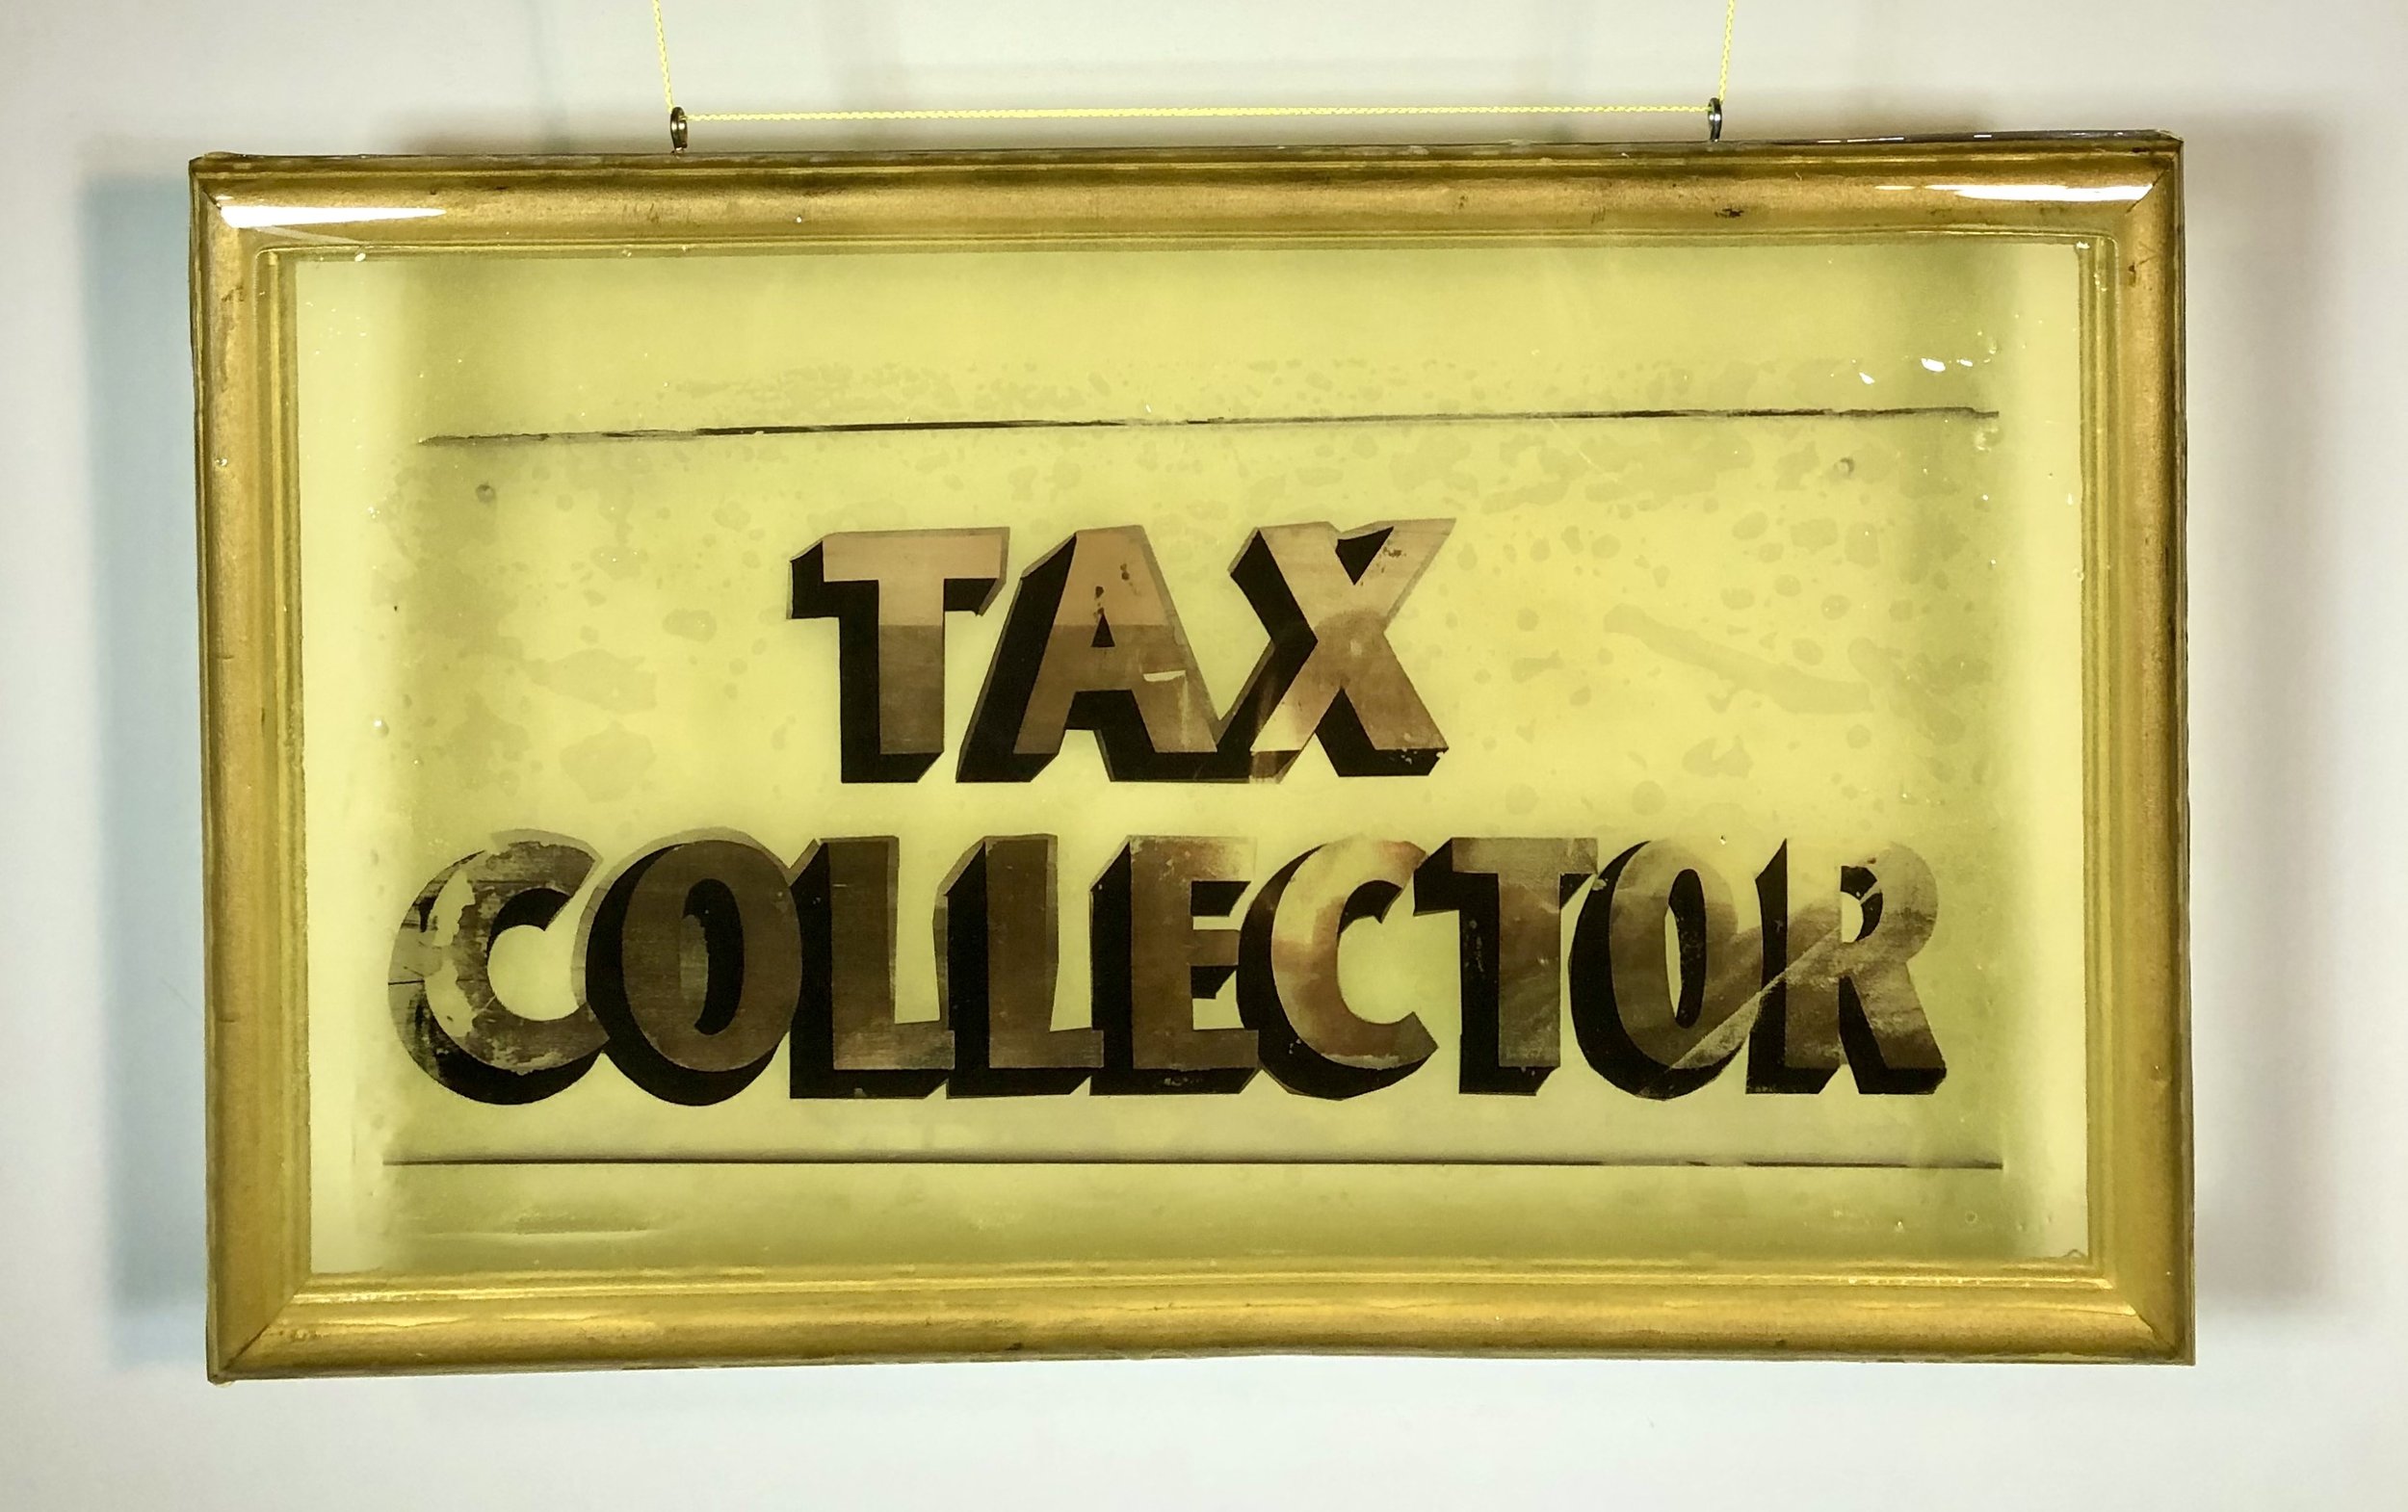    This Tax Collector Sign hung in the corridor outside my Grandfather's office in the Tarrant County Courthouse. He was Reed Stewart, the Tax assessor/collector for 36 years until he retired at 83 years . I loved to visit his office and watch the Ro